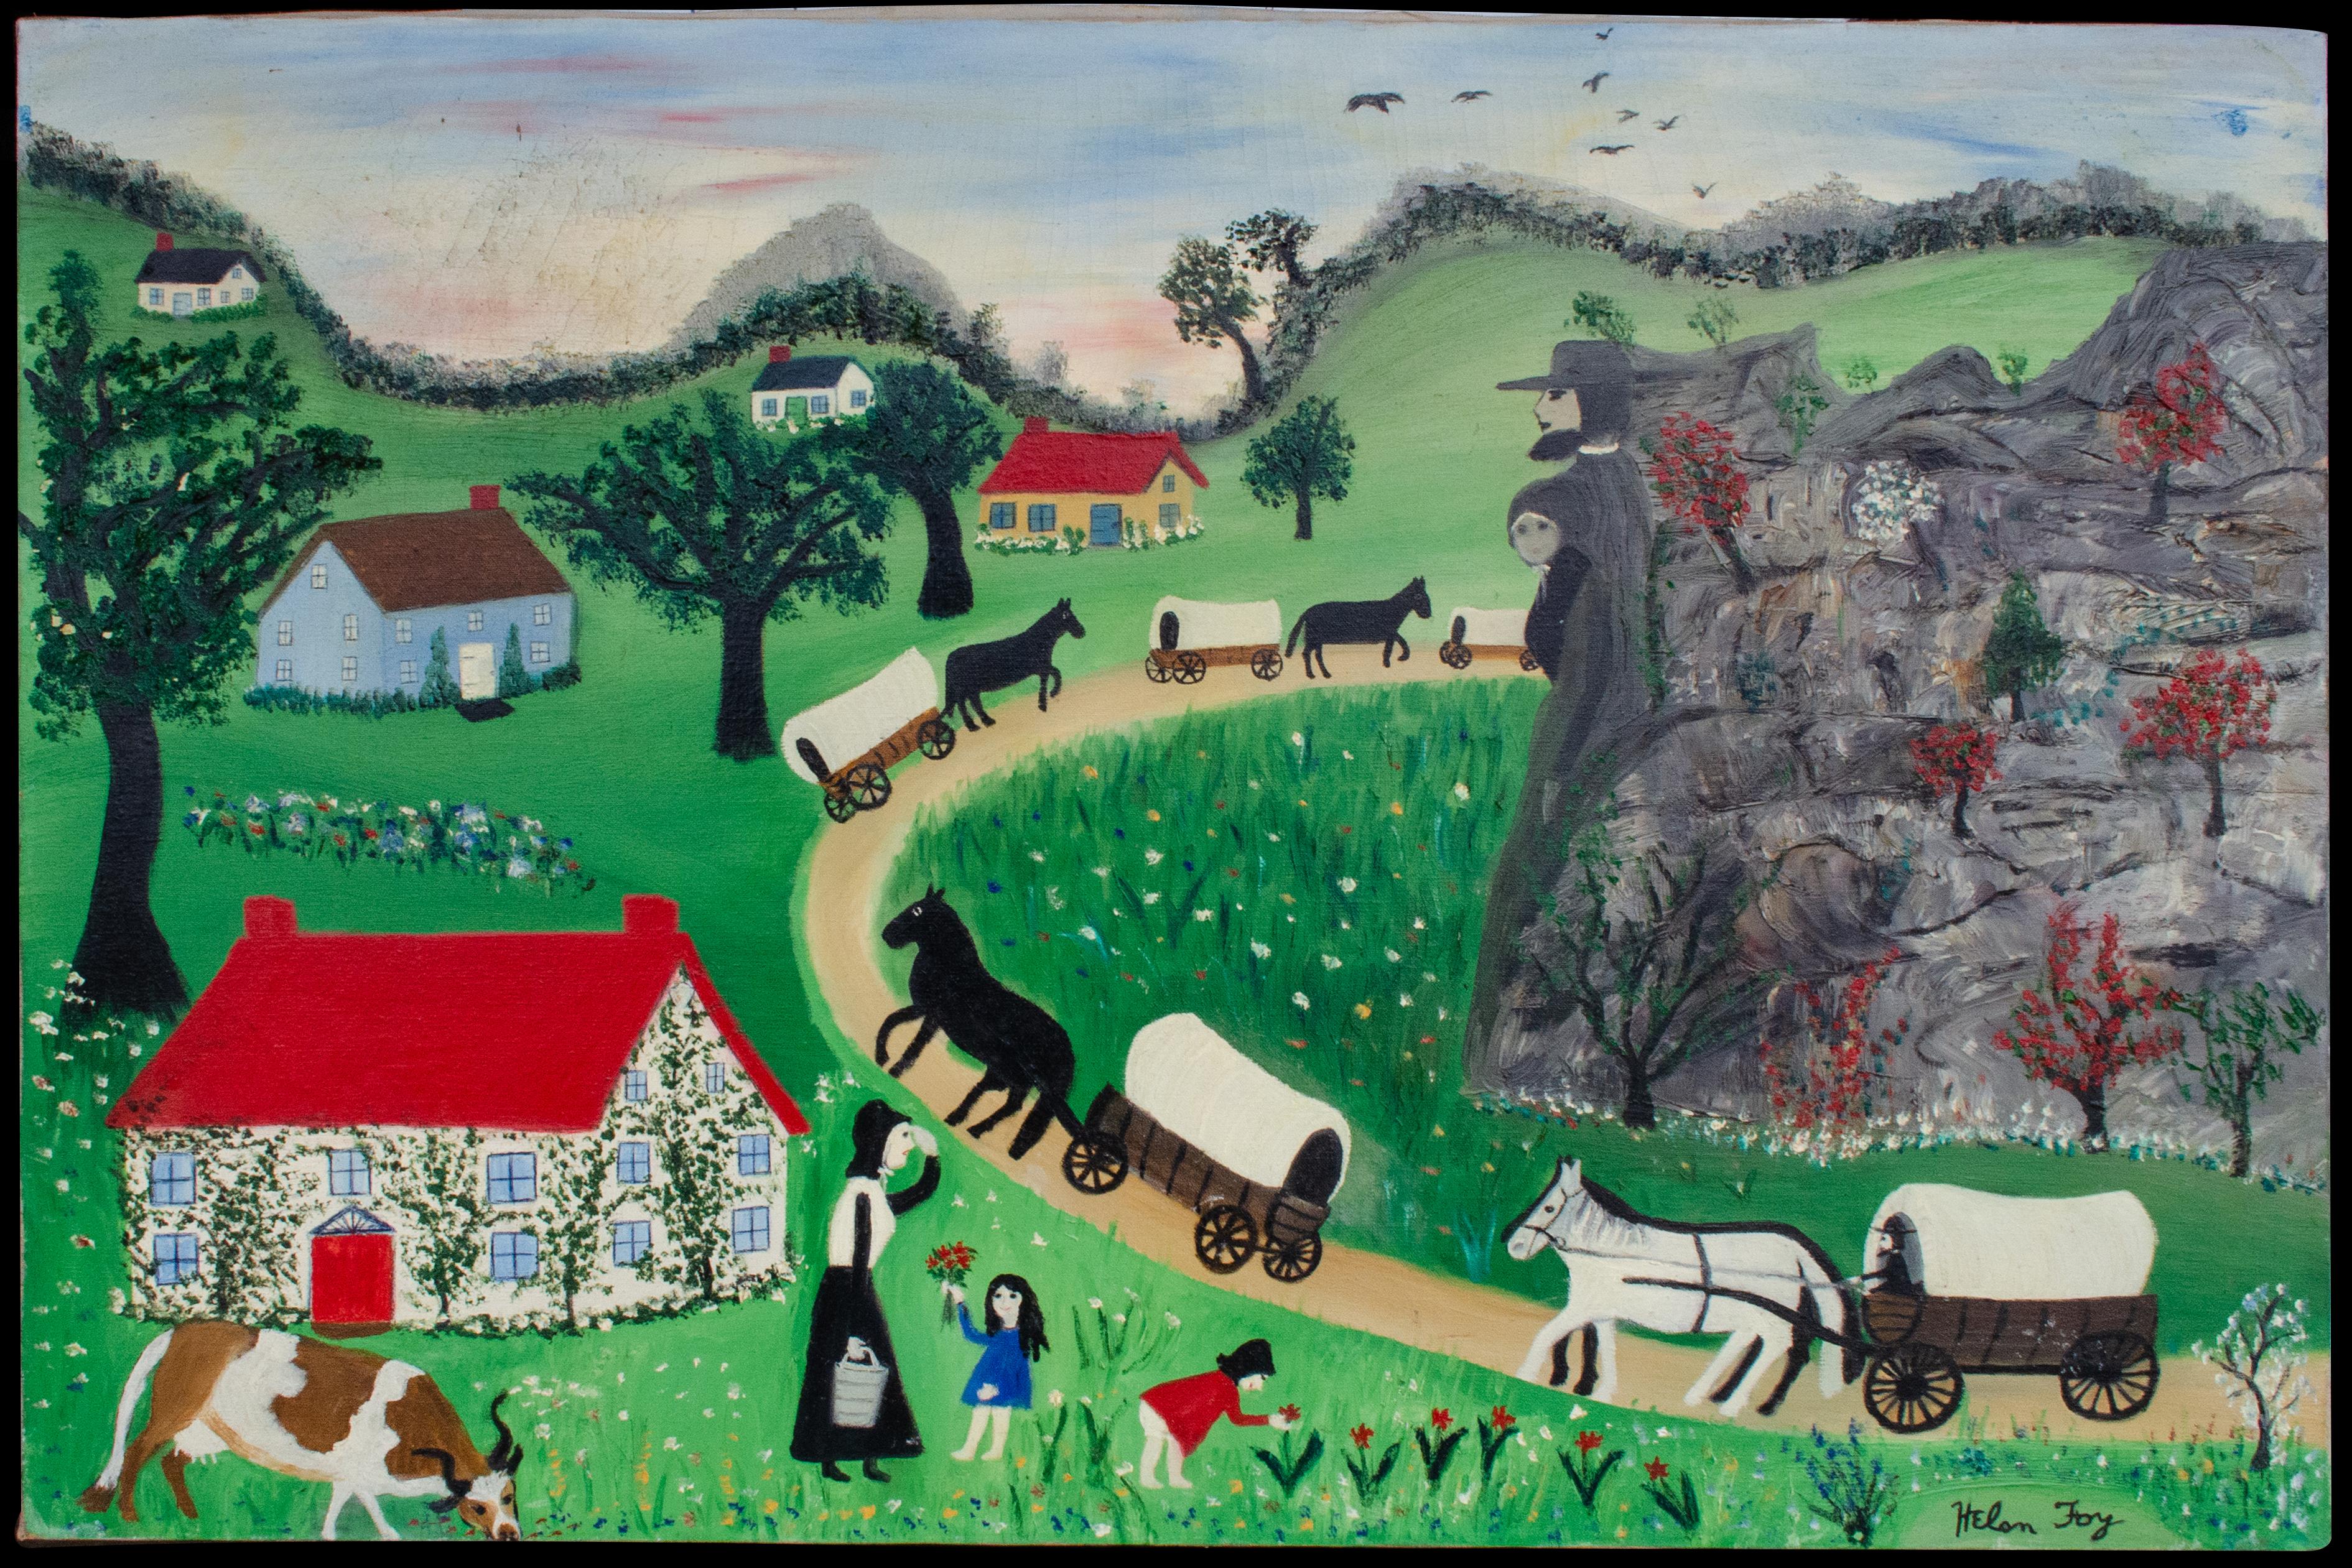 Helen Foy
Dreams of Old Pioneers, 20th Century
Acrylic (?) on canvas
23 3/4 x 36 in. 
Signed lower right: Helen Foy
Titled and signed verso: Dreams of Old Pioneers by Helen Foy

Helen Foy was an American folk artist whose paintings captured a